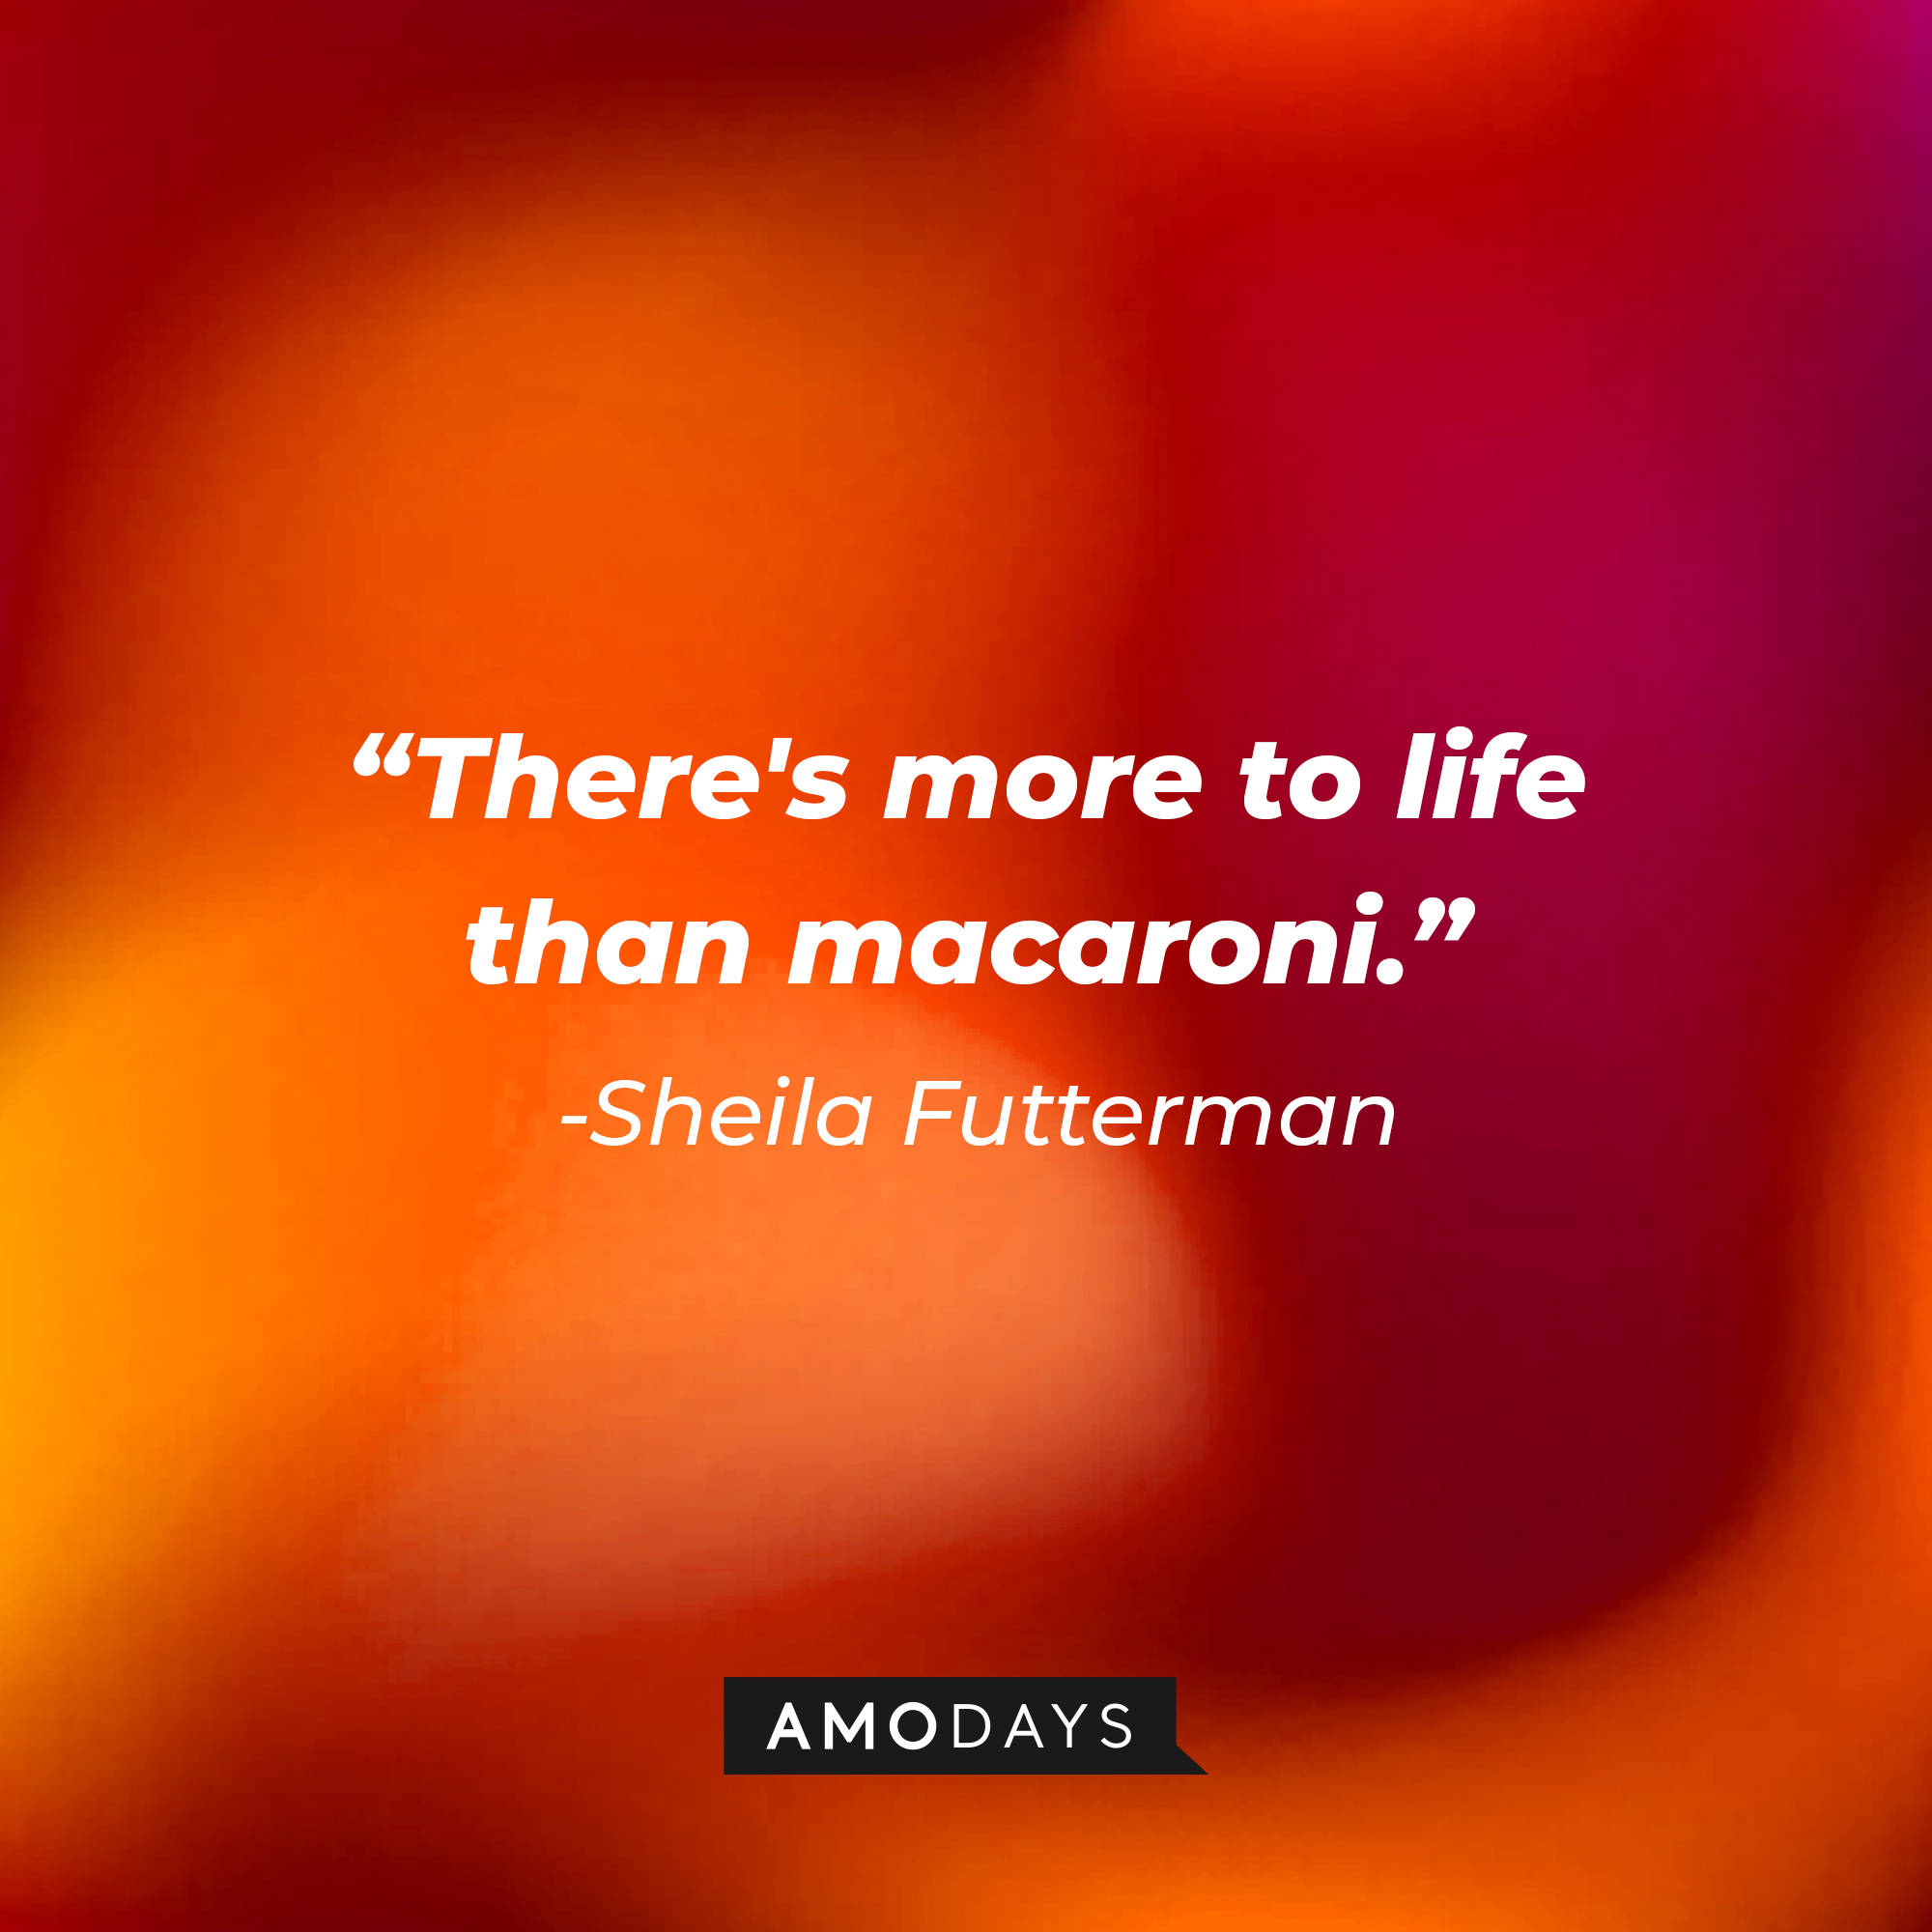 Sheila Futterman's quote: "There's more to life than macaroni." | Source: AmoDays